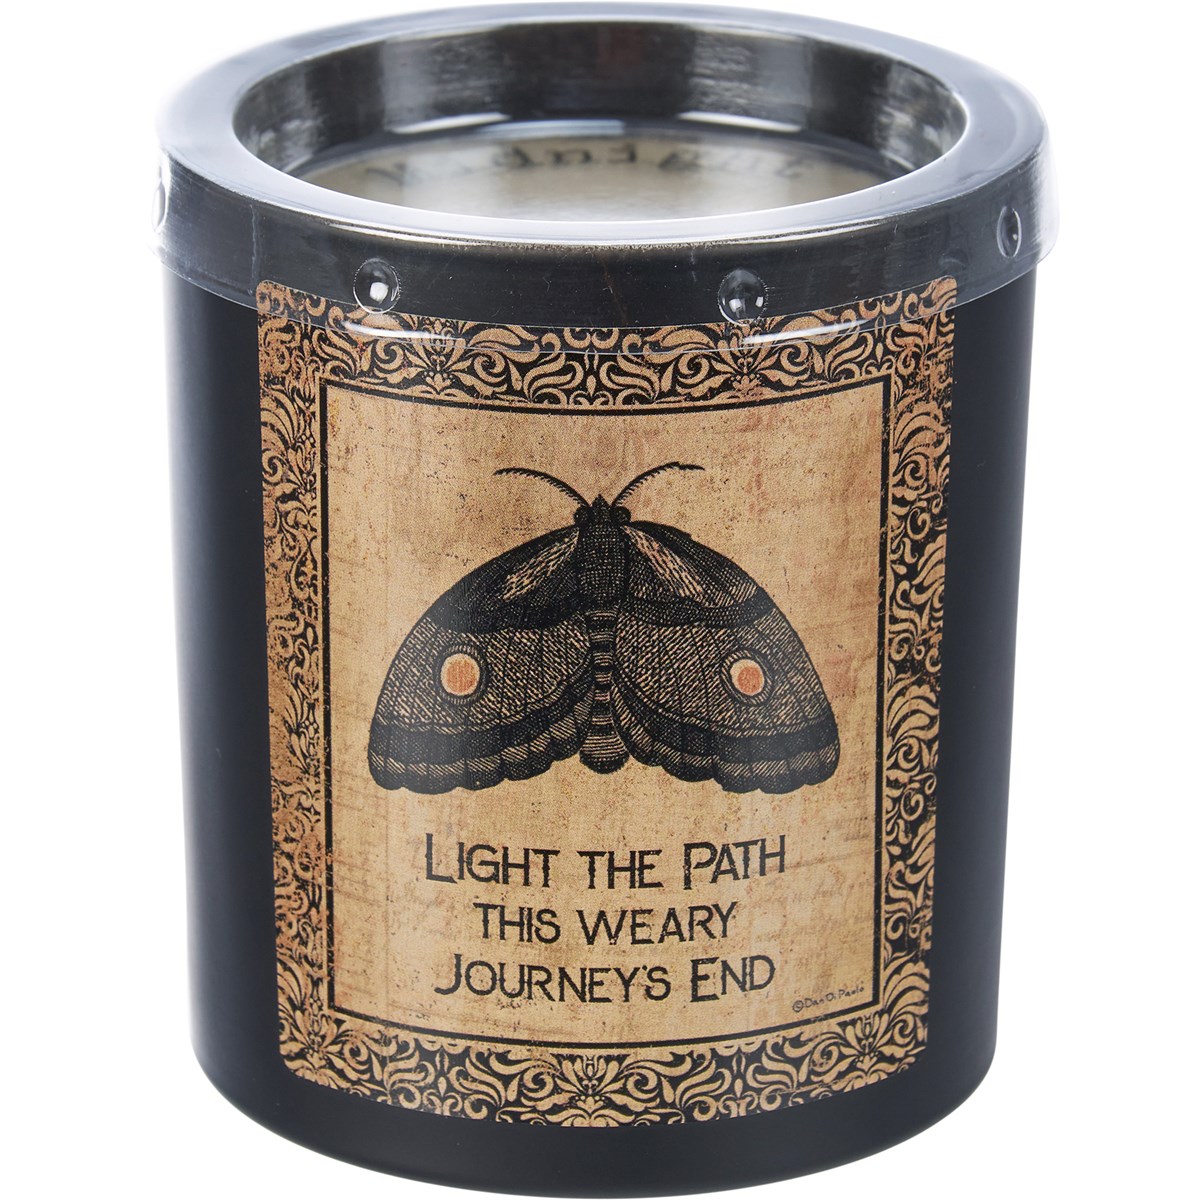 Light The Path Journey's End Candle - Soy Wax, Glass, Cotton